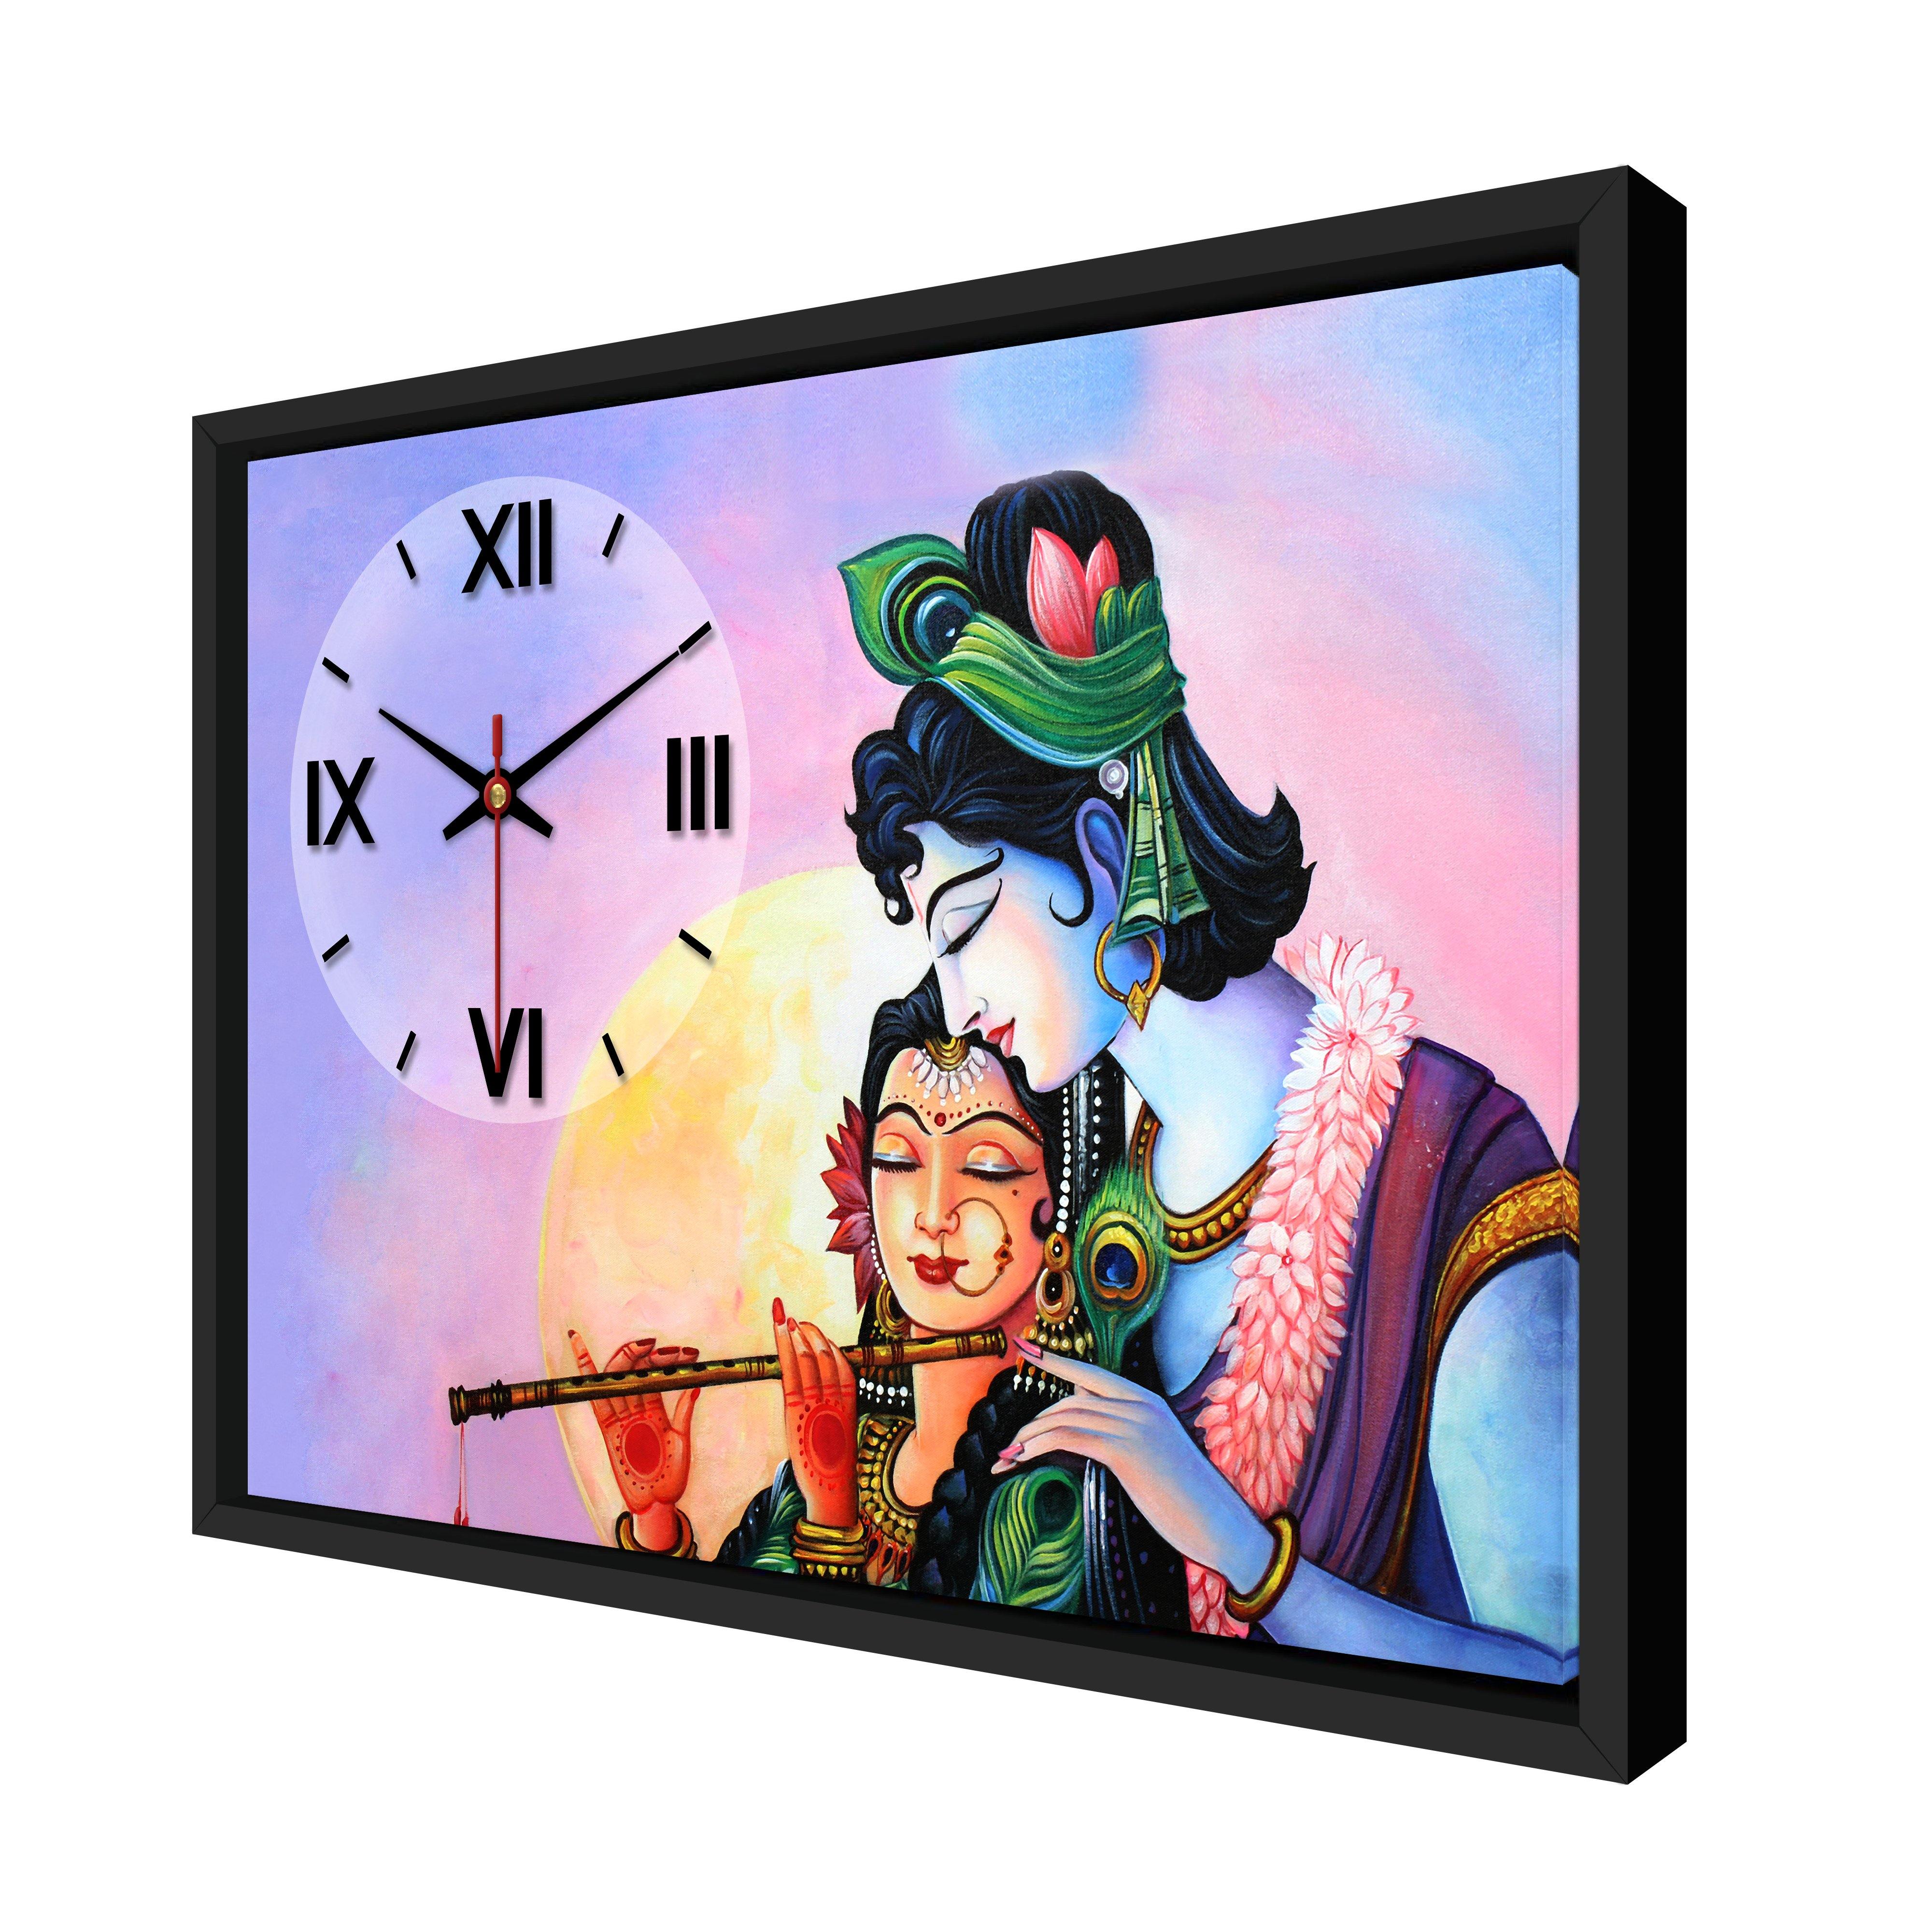 Floating Frame Lord Radha Krishna Wall Painting with Clock